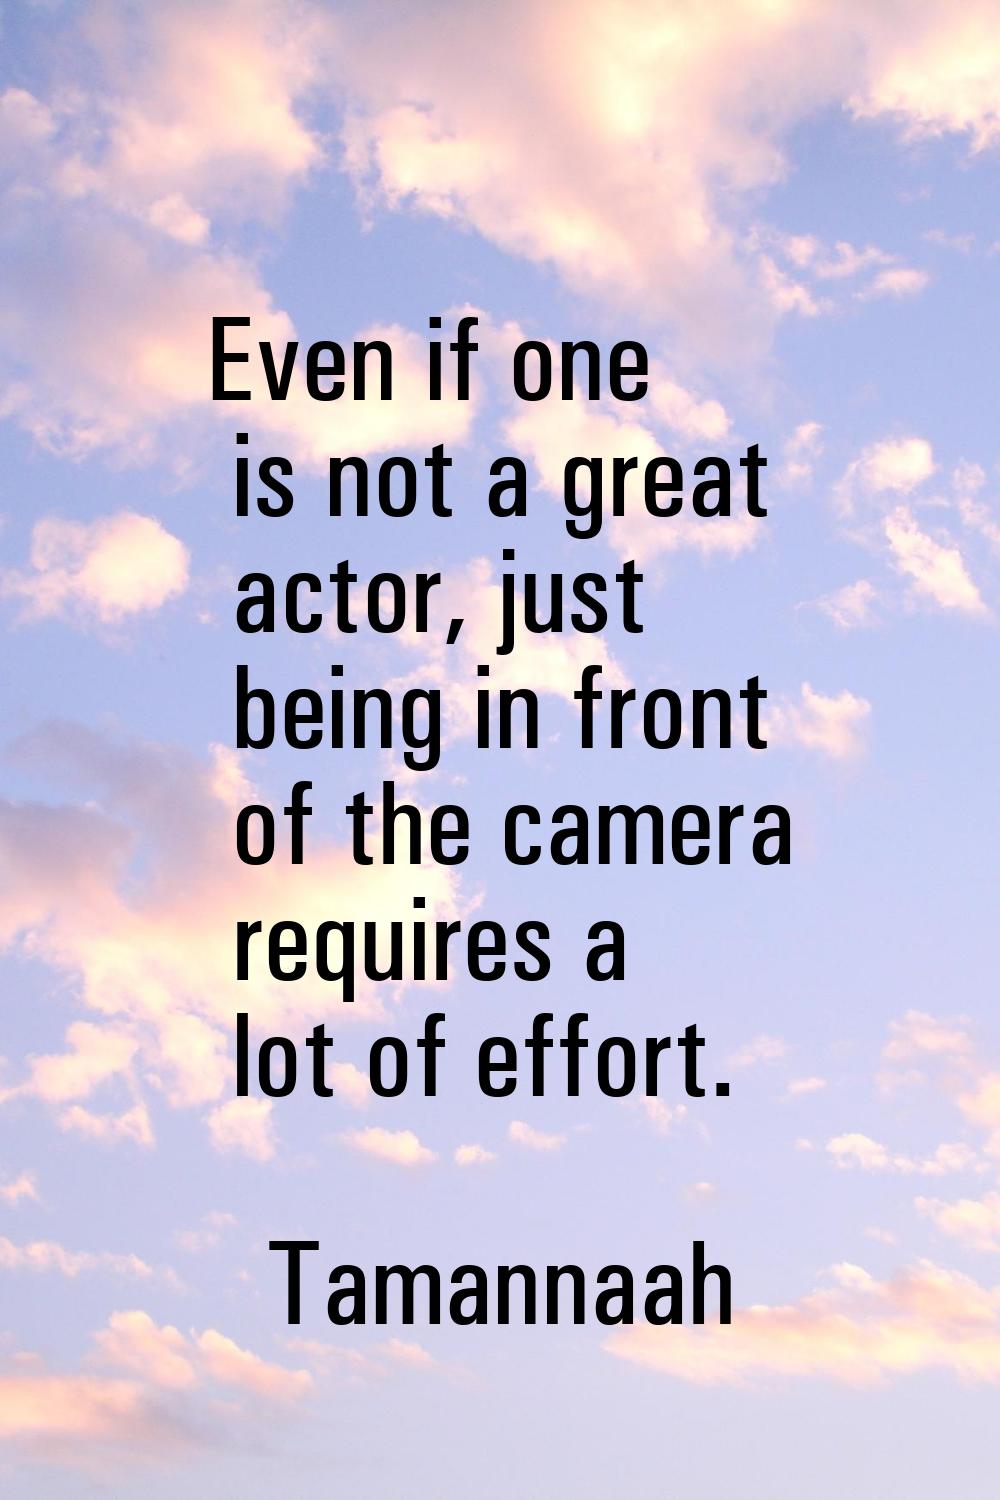 Even if one is not a great actor, just being in front of the camera requires a lot of effort.